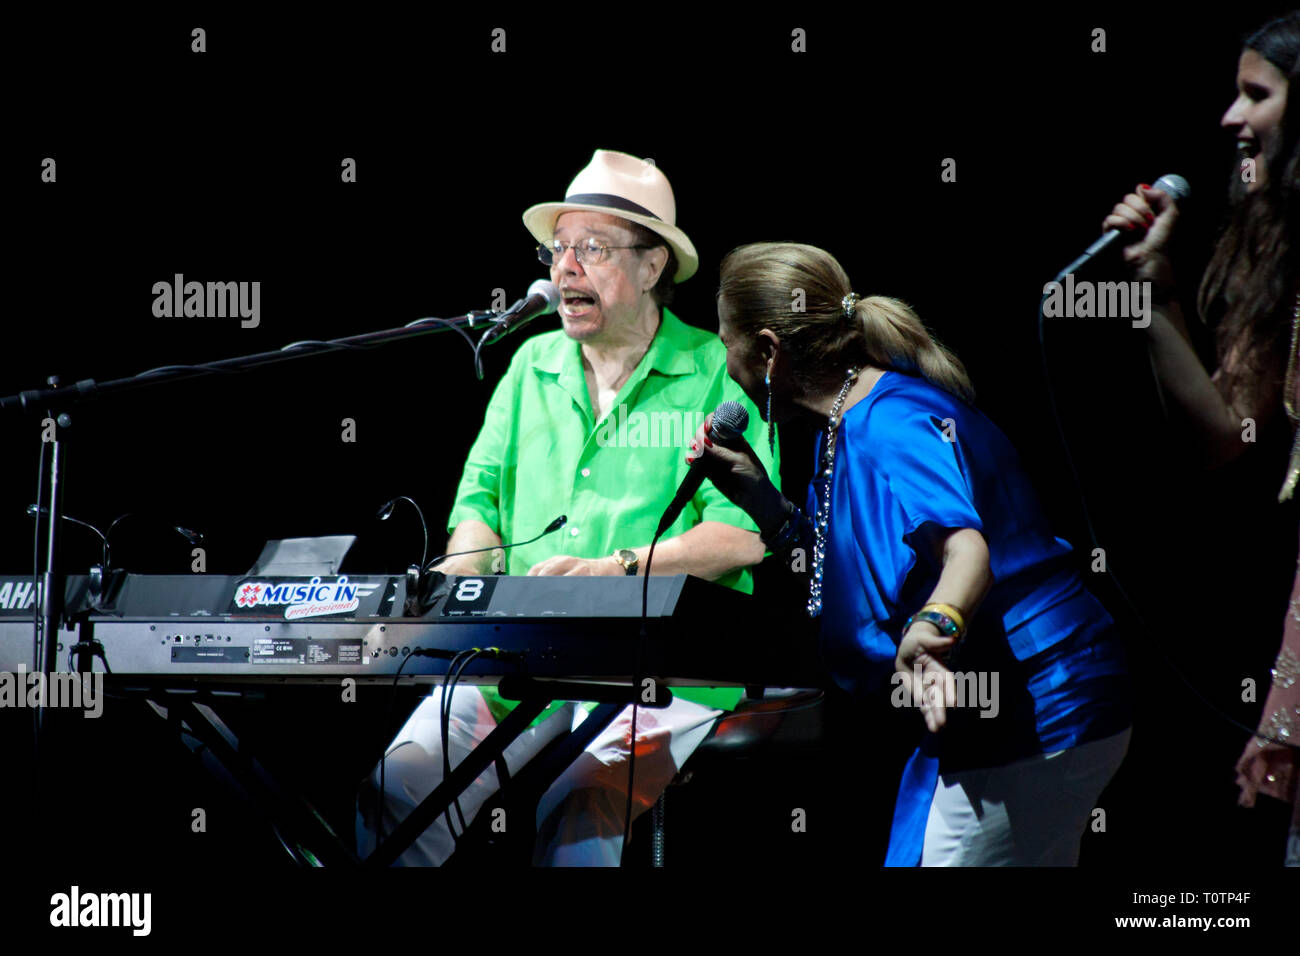 PERUGIA, ITALY - JULY 14, 2011 - Sergio Mendes Gracinha Leporace and Rozzi Crane performing on main stage at Umbria Jazz Festival - July 14, 2011 Stock Photo